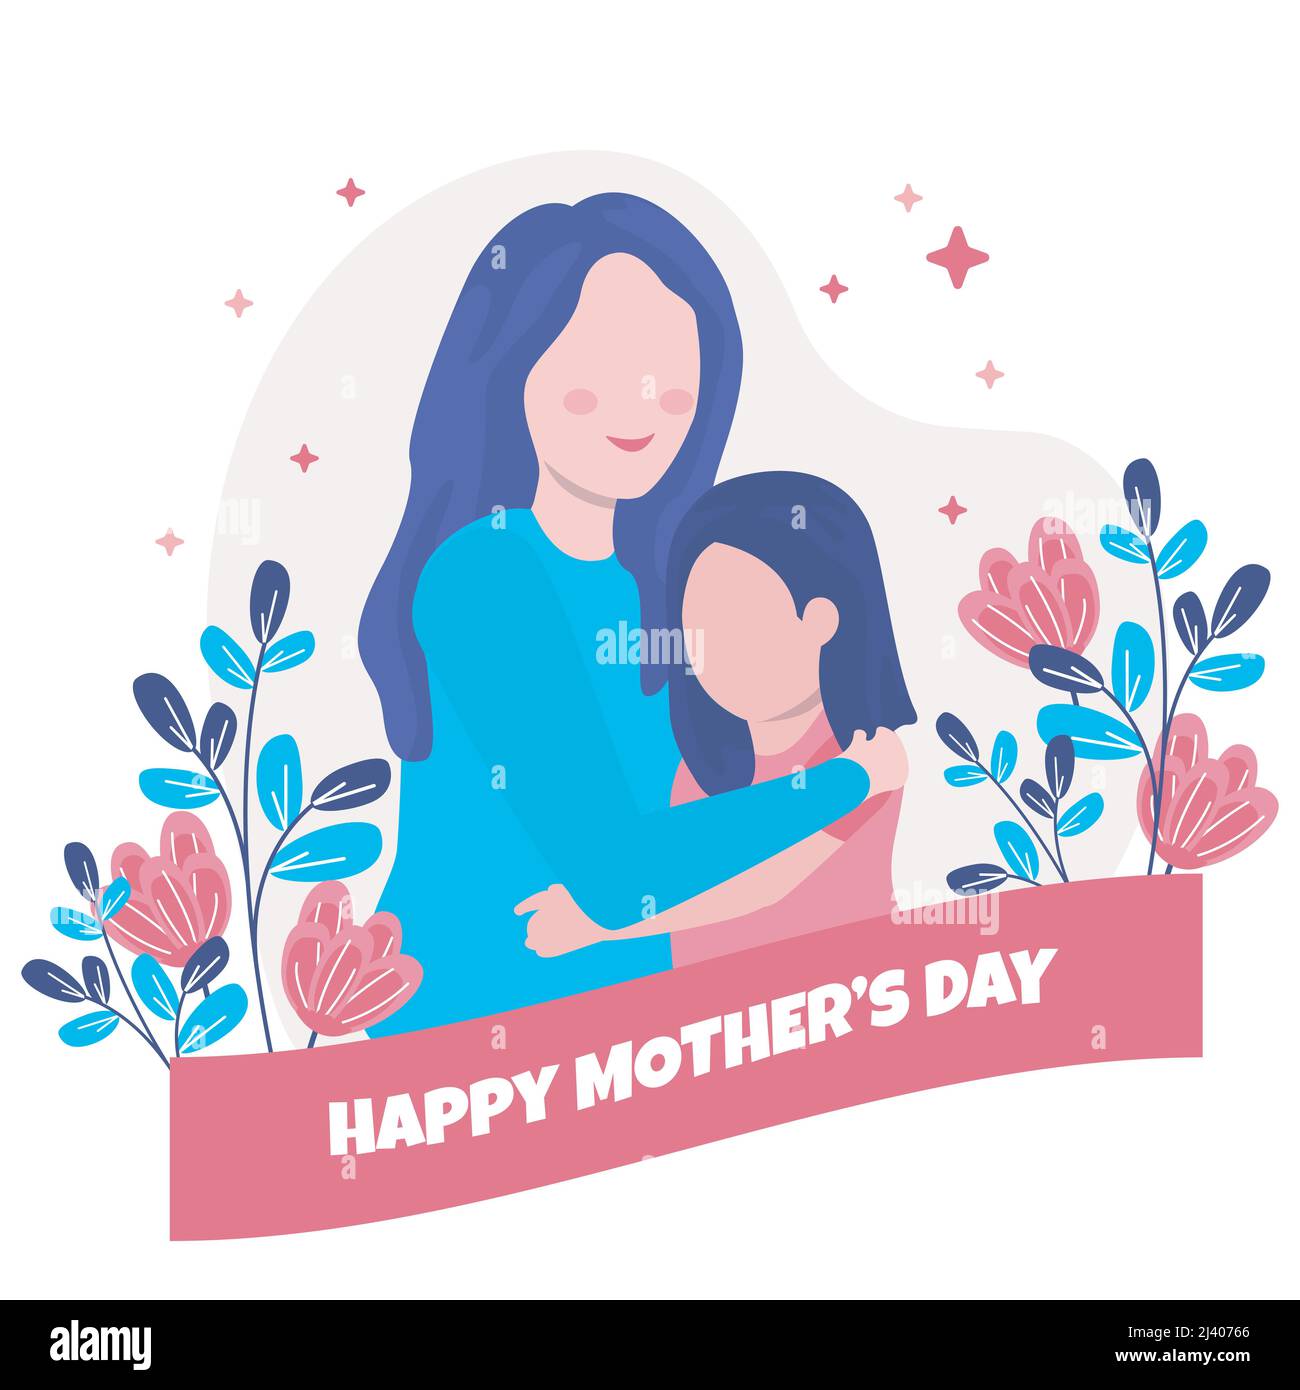 Happy Mother's Day Daughter Child Flower Floral Flat Illustration Stock Vector